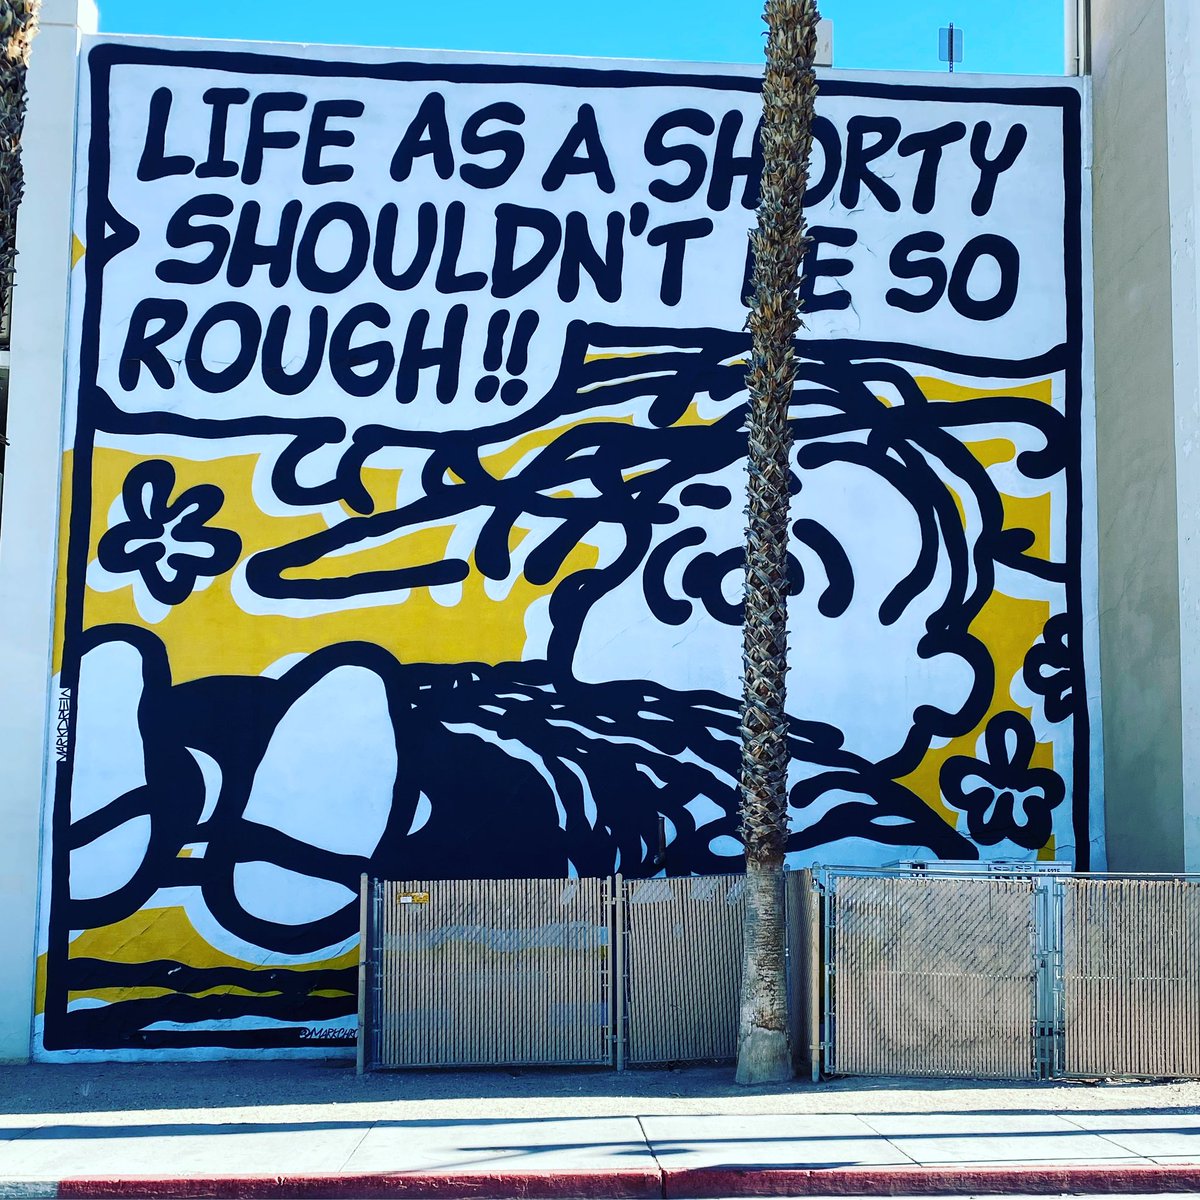 Just a reminder you’ll make it thru and will come out stronger for it #lifeisallaboutperspective by this @snoopygrams #peanuts #snoopy inspired #streetart #graffiti art #urbanart #mural #artiseverywhere